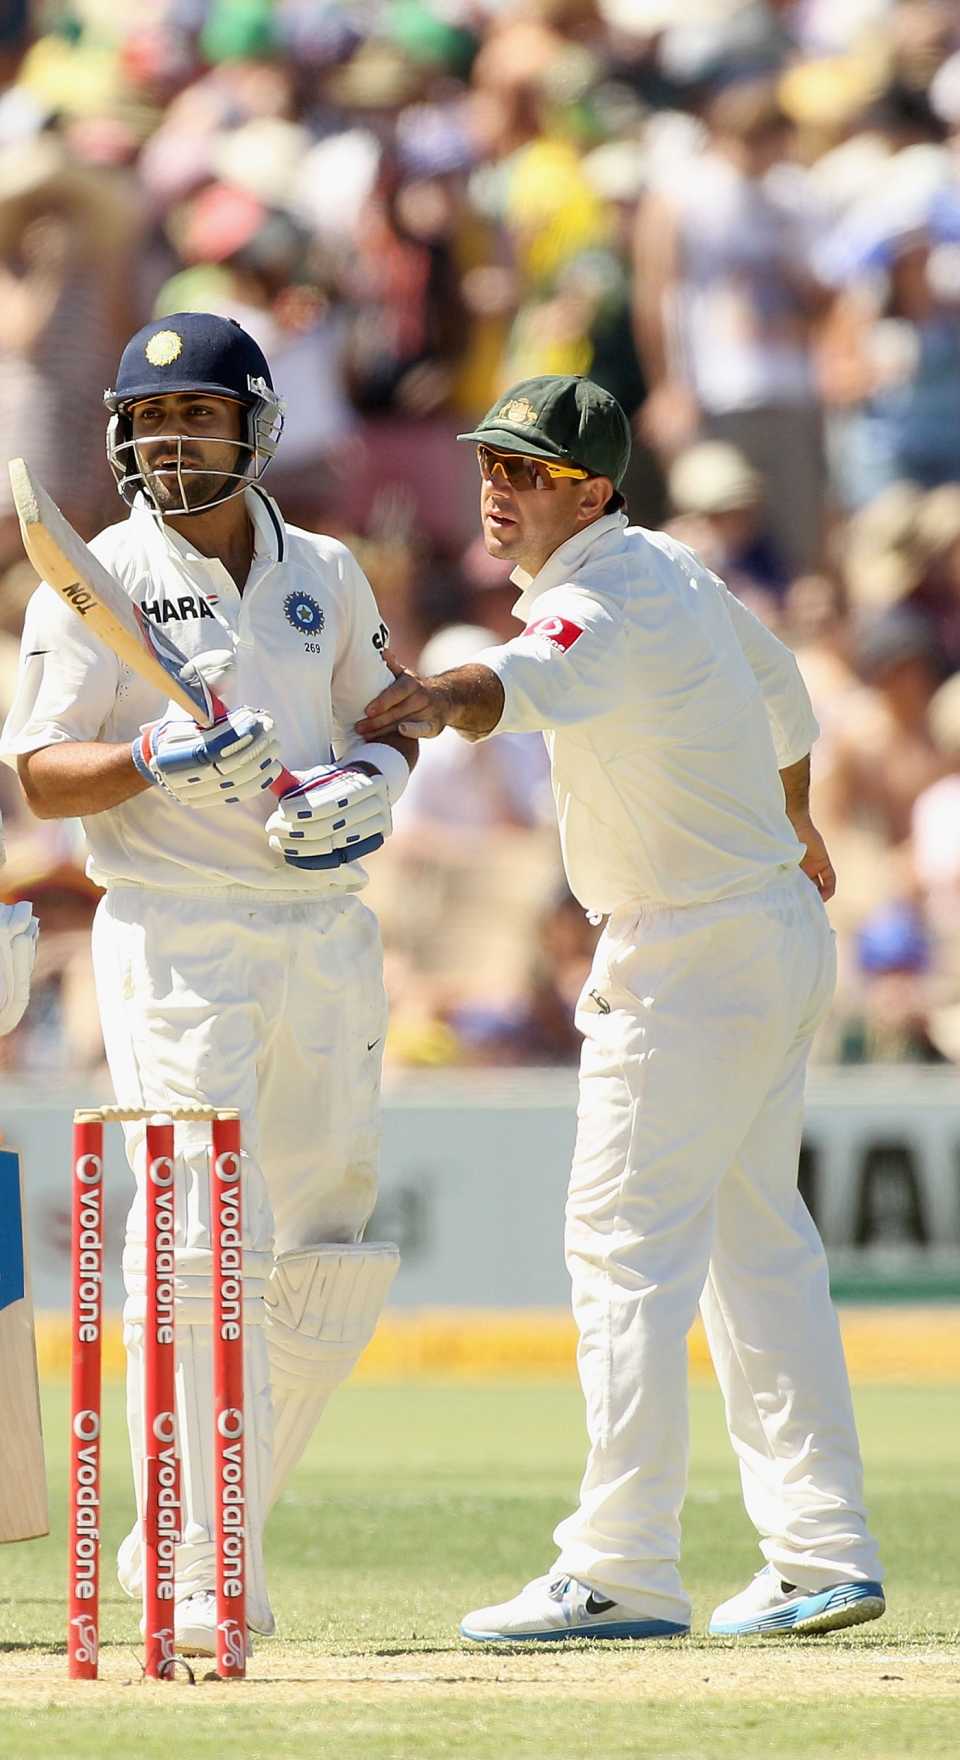 Ricky Ponting steps in as Virat Kohli argues with Australian players, Australia v India, fourth Test, day three, Adelaide, January 26, 2012